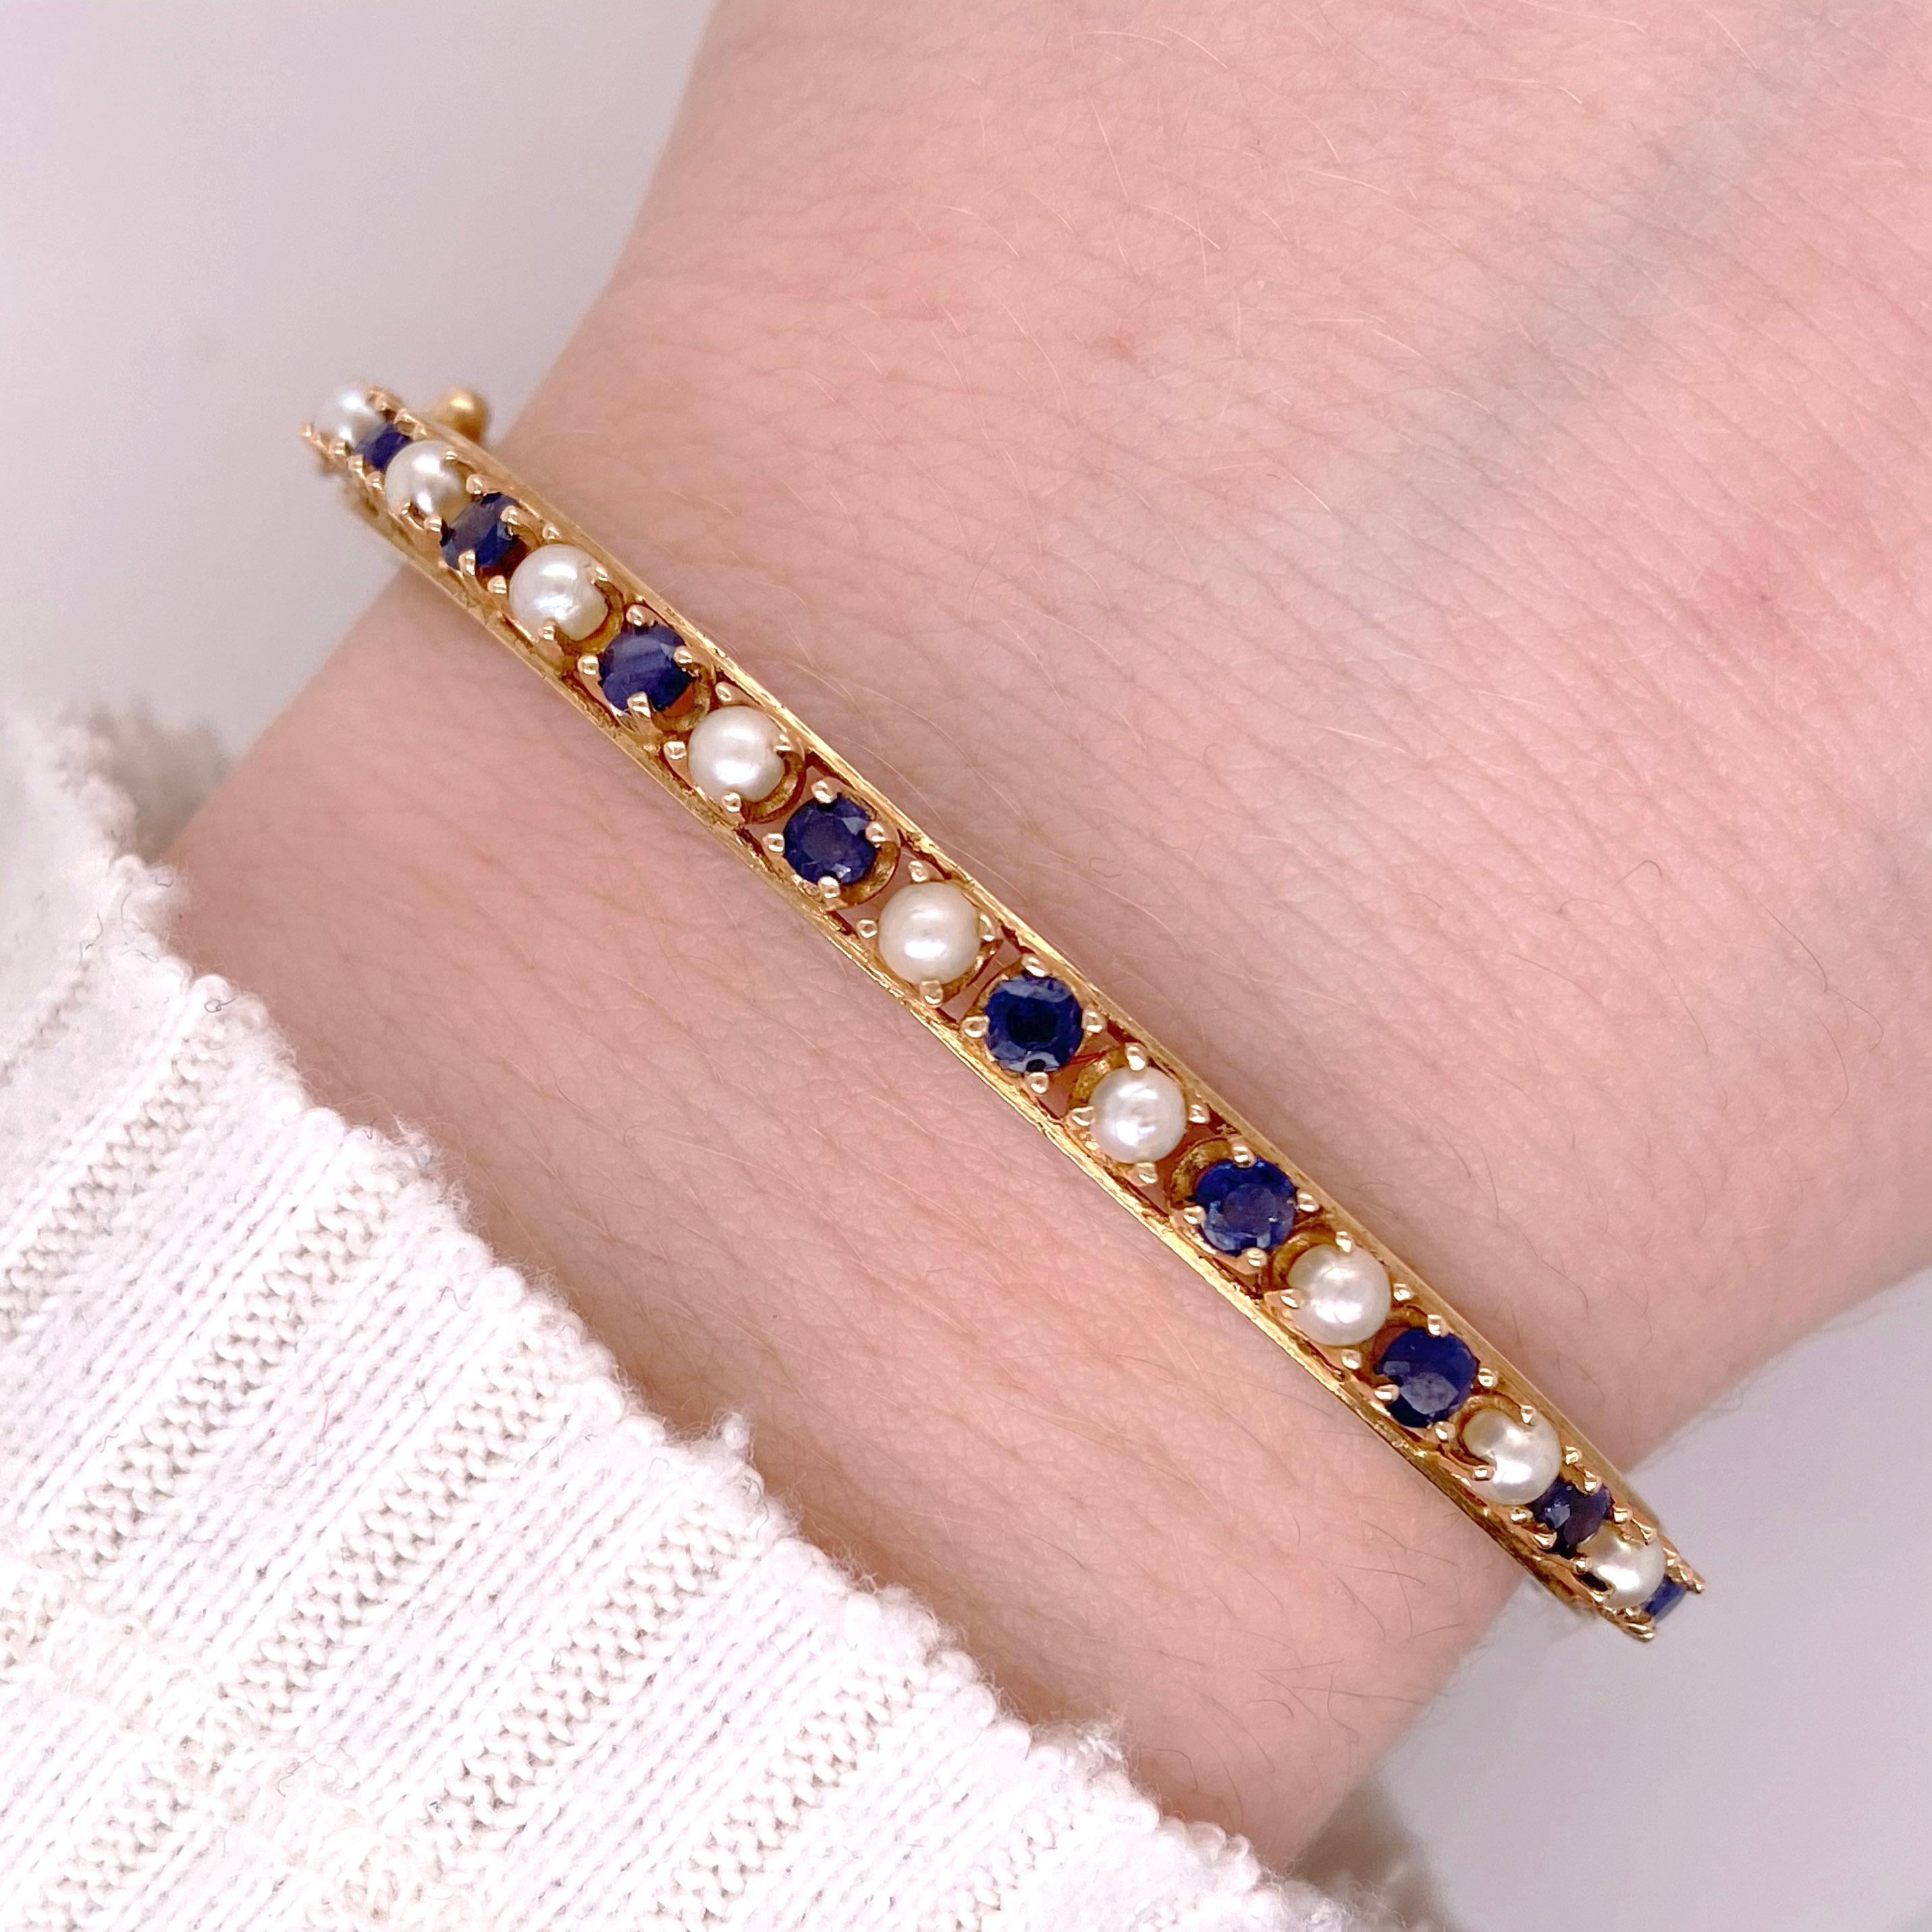 This is a one of a kind piece is a cute addition to any fine jewelry collection. With all natural gemstones and quality gold this piece can become a memorable item in your collection and be worn forever! Blue and white are neutral colors that can be